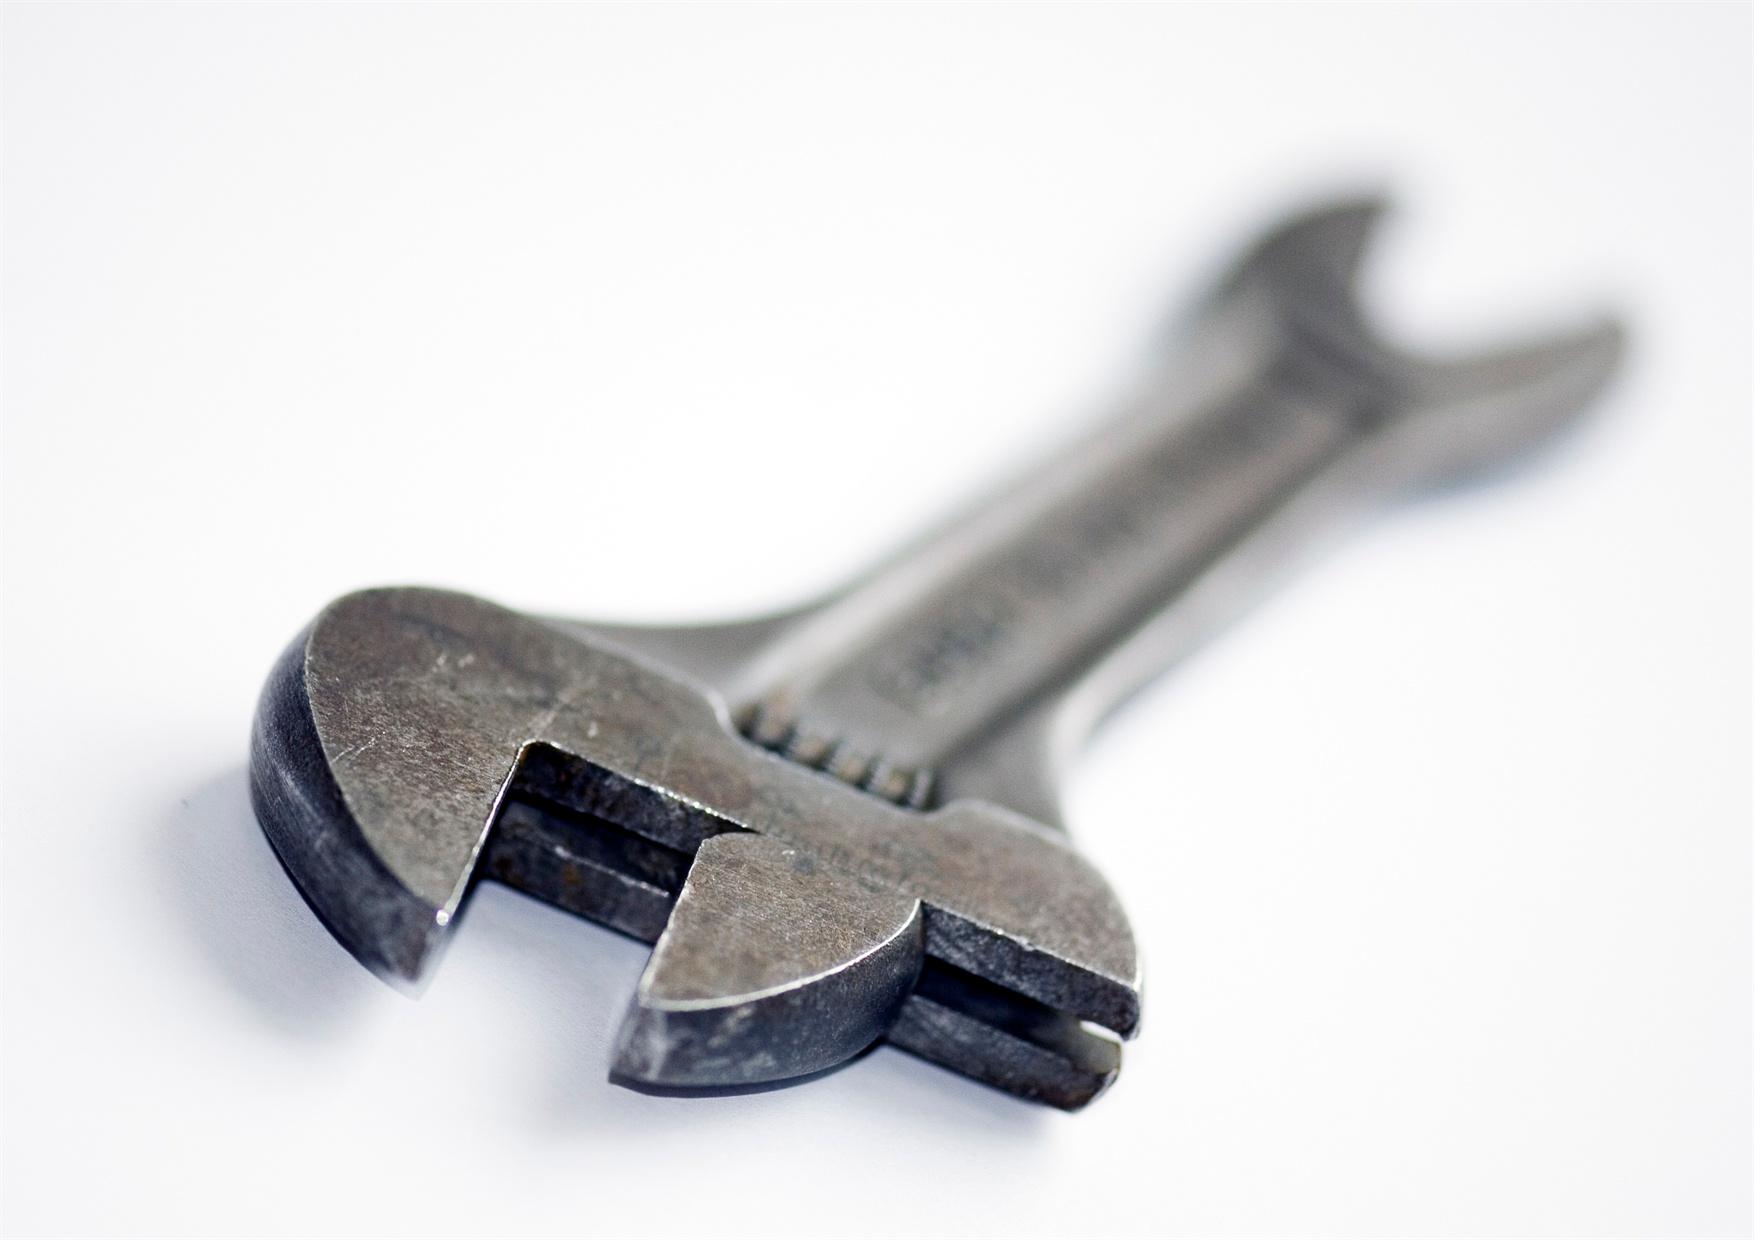 An adjustable wrench that lies diagonally.